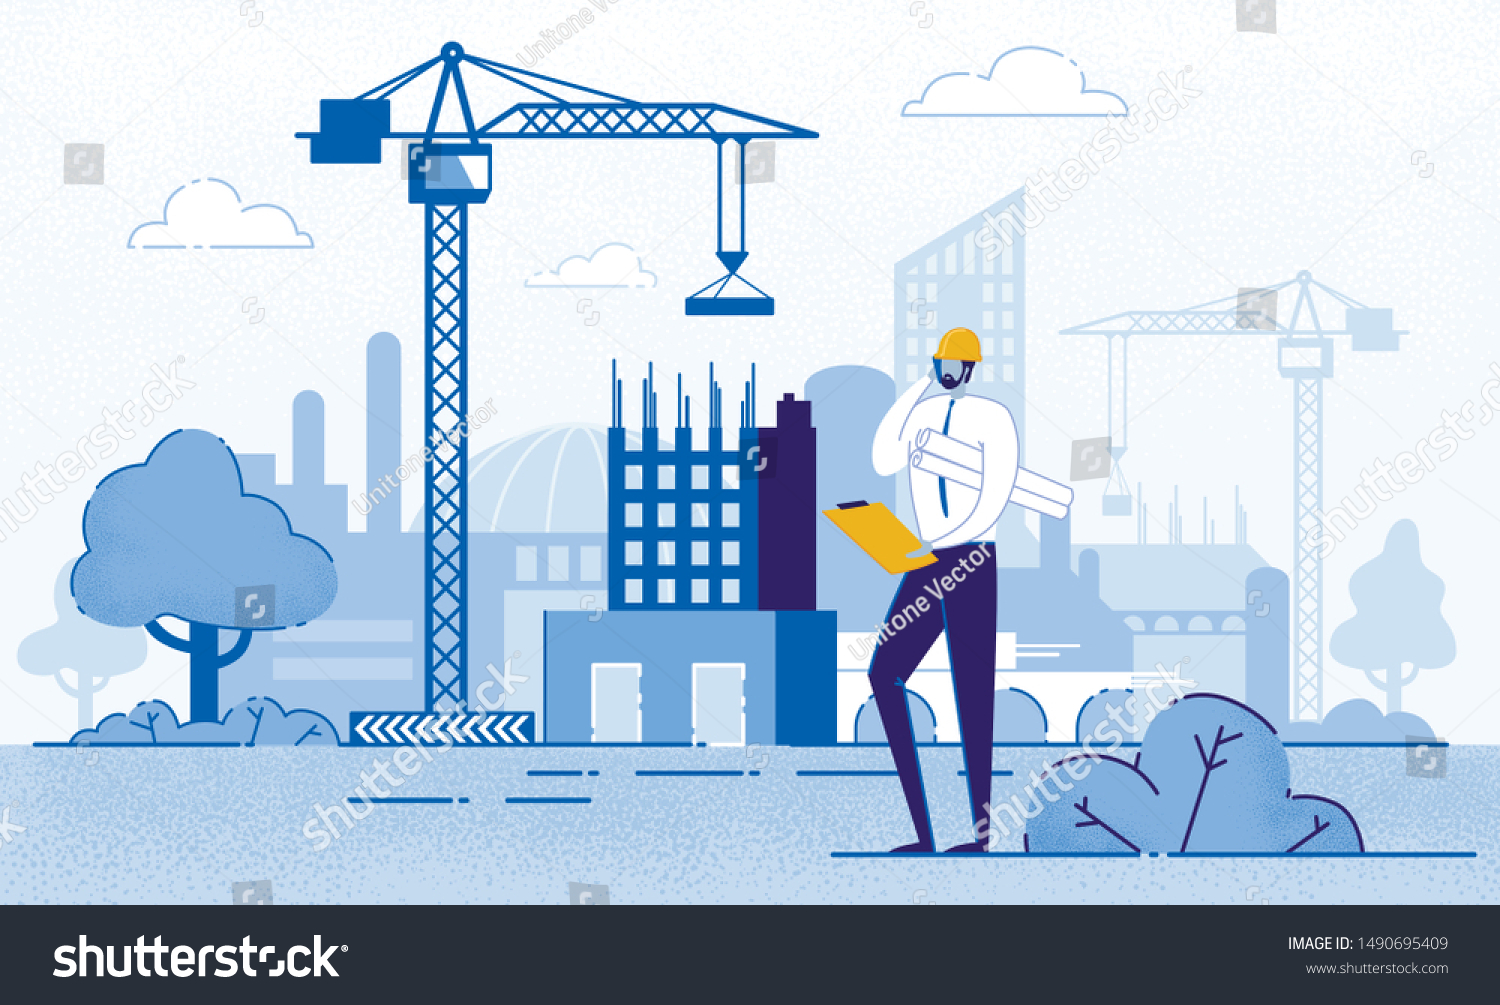 Architect Holding Blueprints near Construction Flat Cartoon Vector Illustration. Engineer Talking on Phone near New Building. Man with Project in Helmet and Suit. Crane Constructing House.